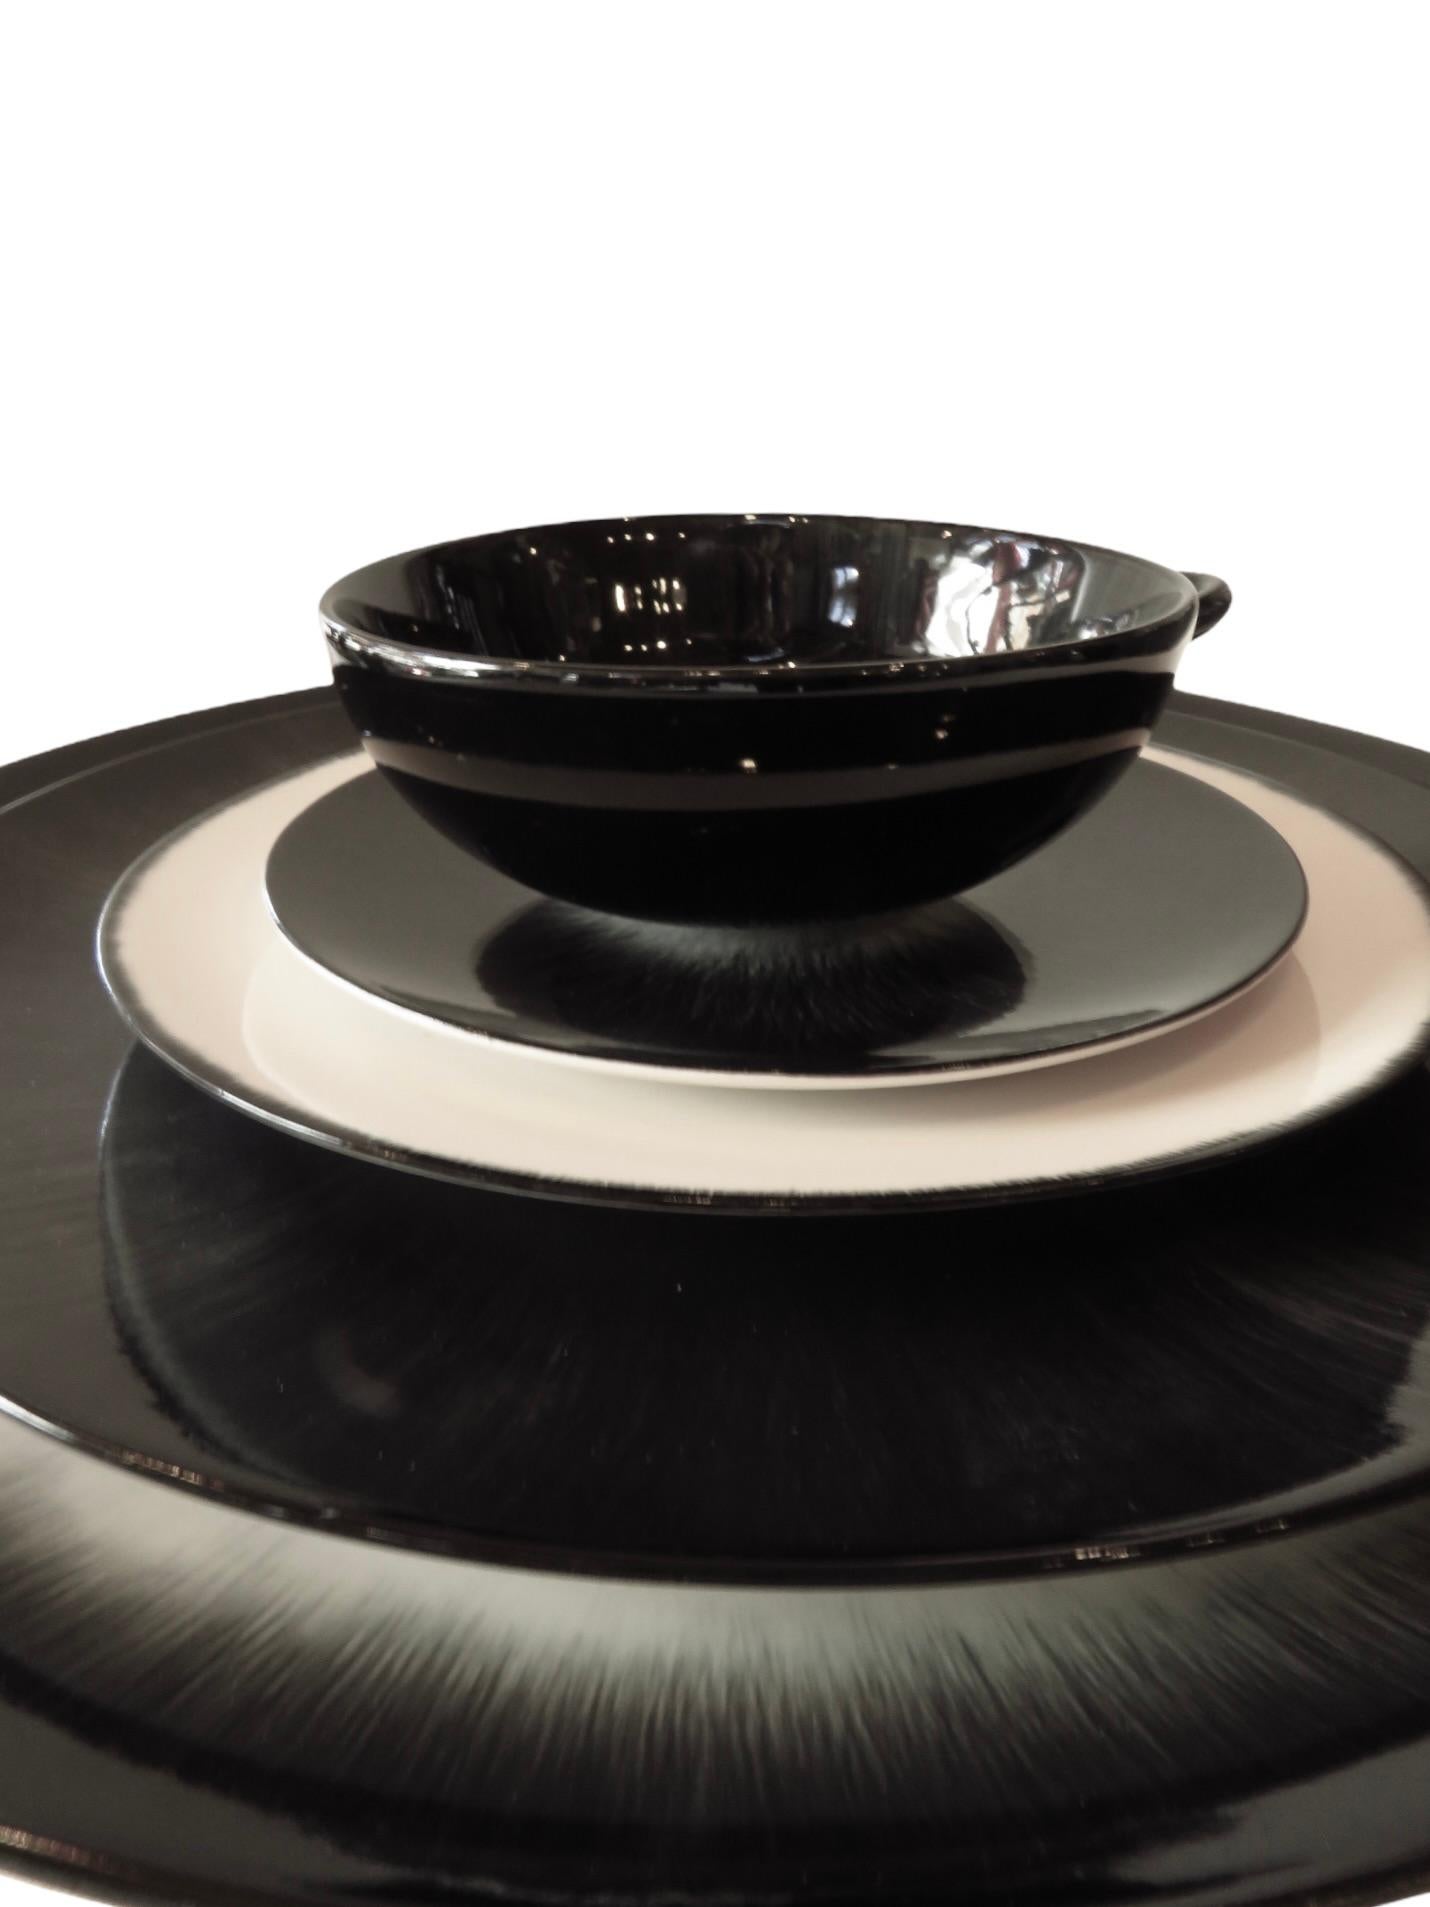 Black Ann Demeulemeester for Serax 17.5 cm plates (set of two) For Sale